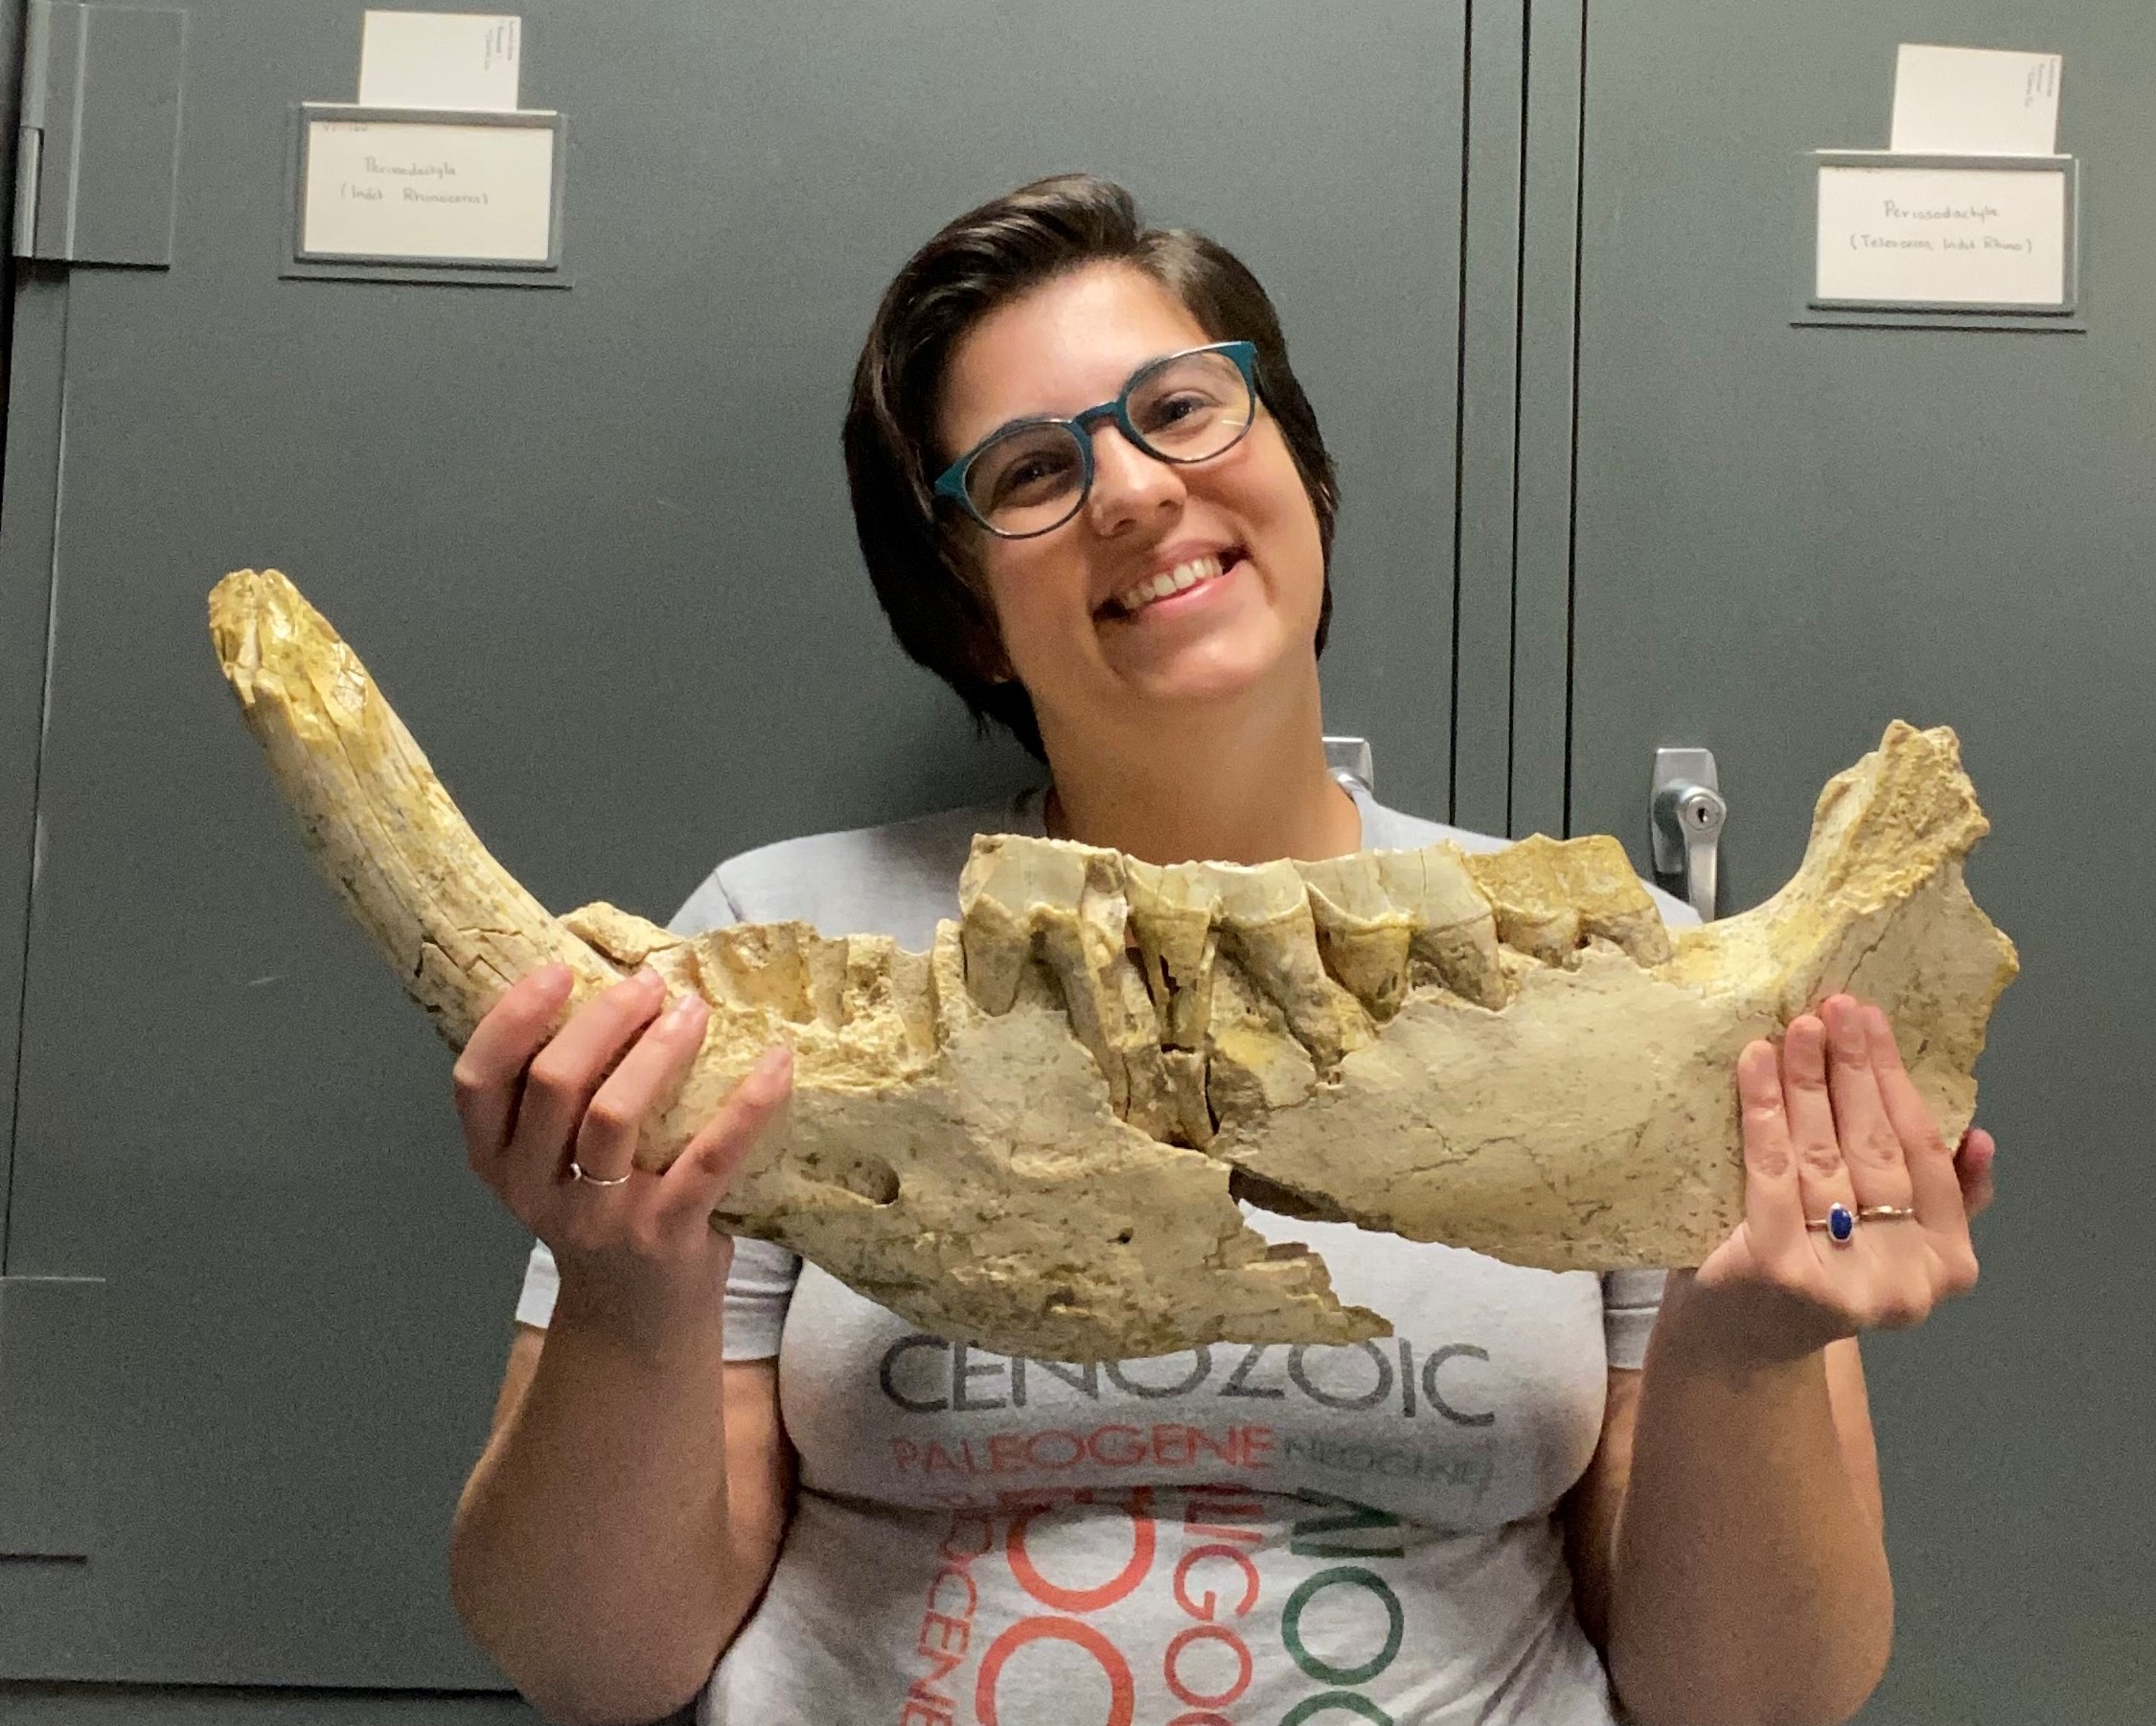 Paleontology Collections Manager and co-PI on the grant Dr. Aly Baumgartner holding a fossil rhinoceras jaw from the Miocene Minium Quarry.